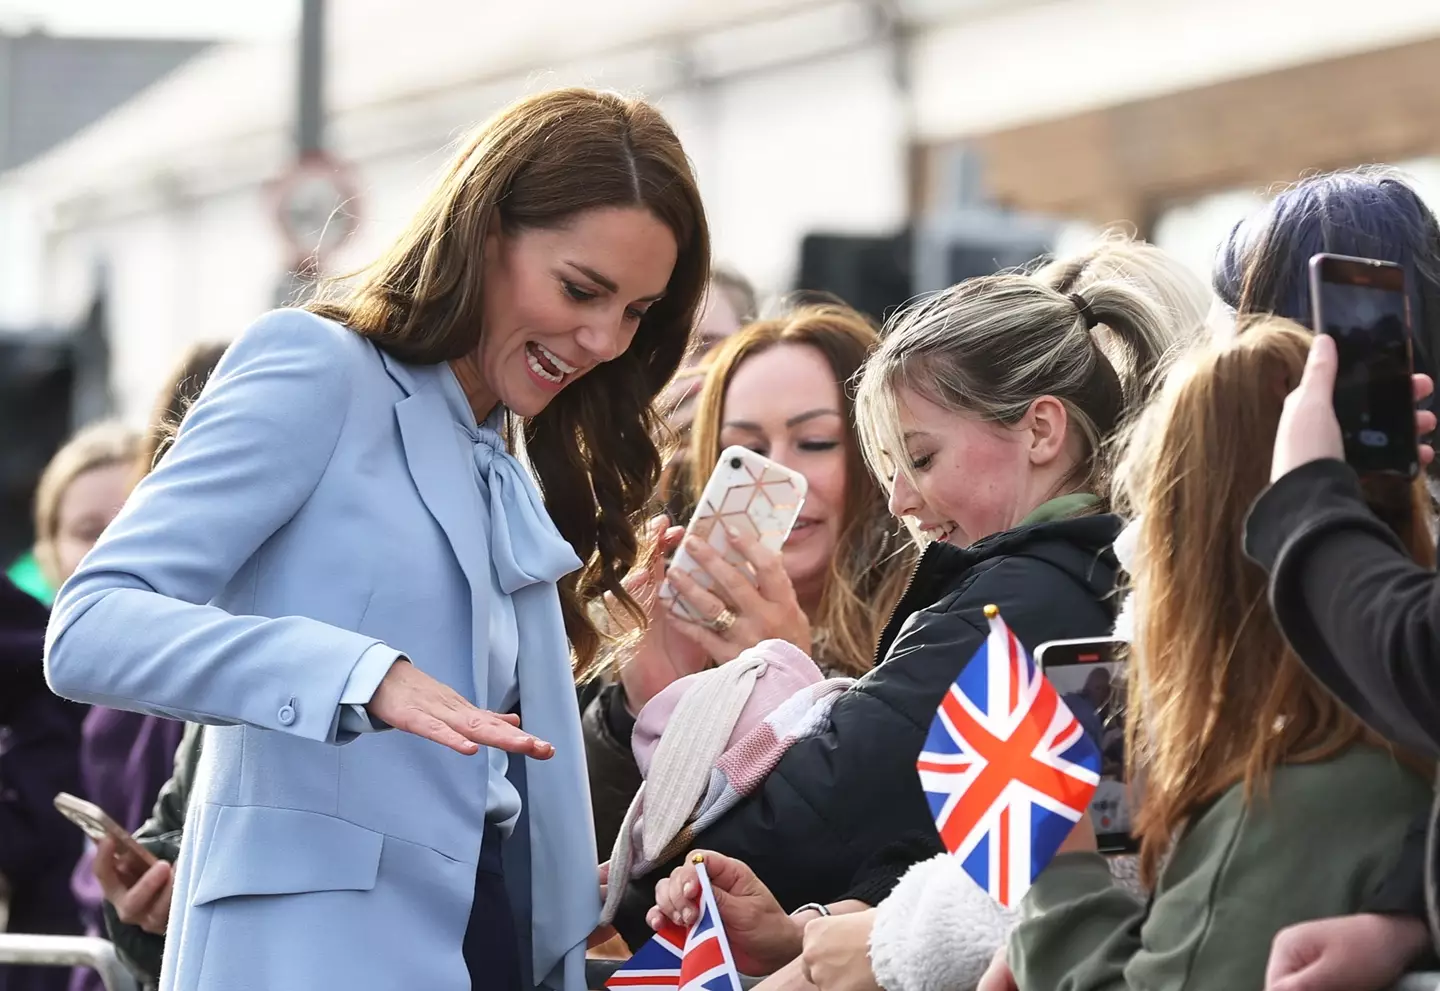 Hundreds of people turned out to meet Kate and William on their visit to Belfast.